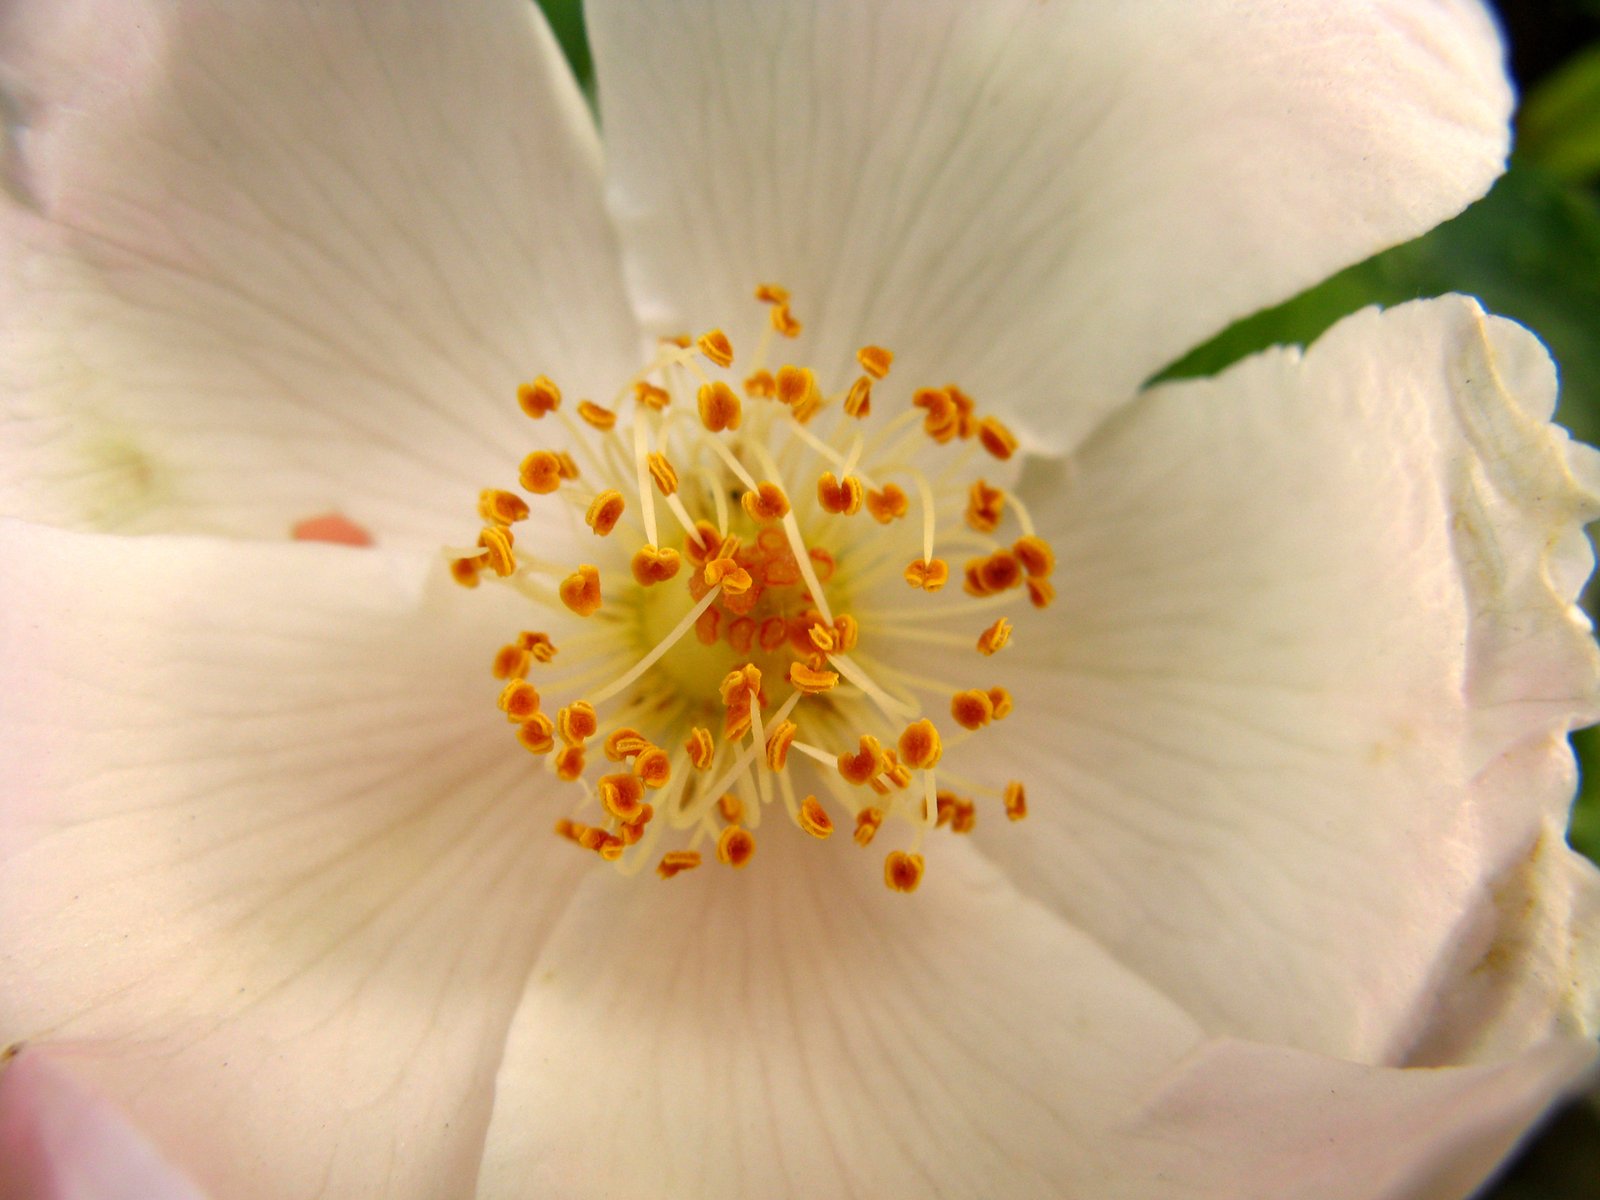 the center of a white flower on a plant